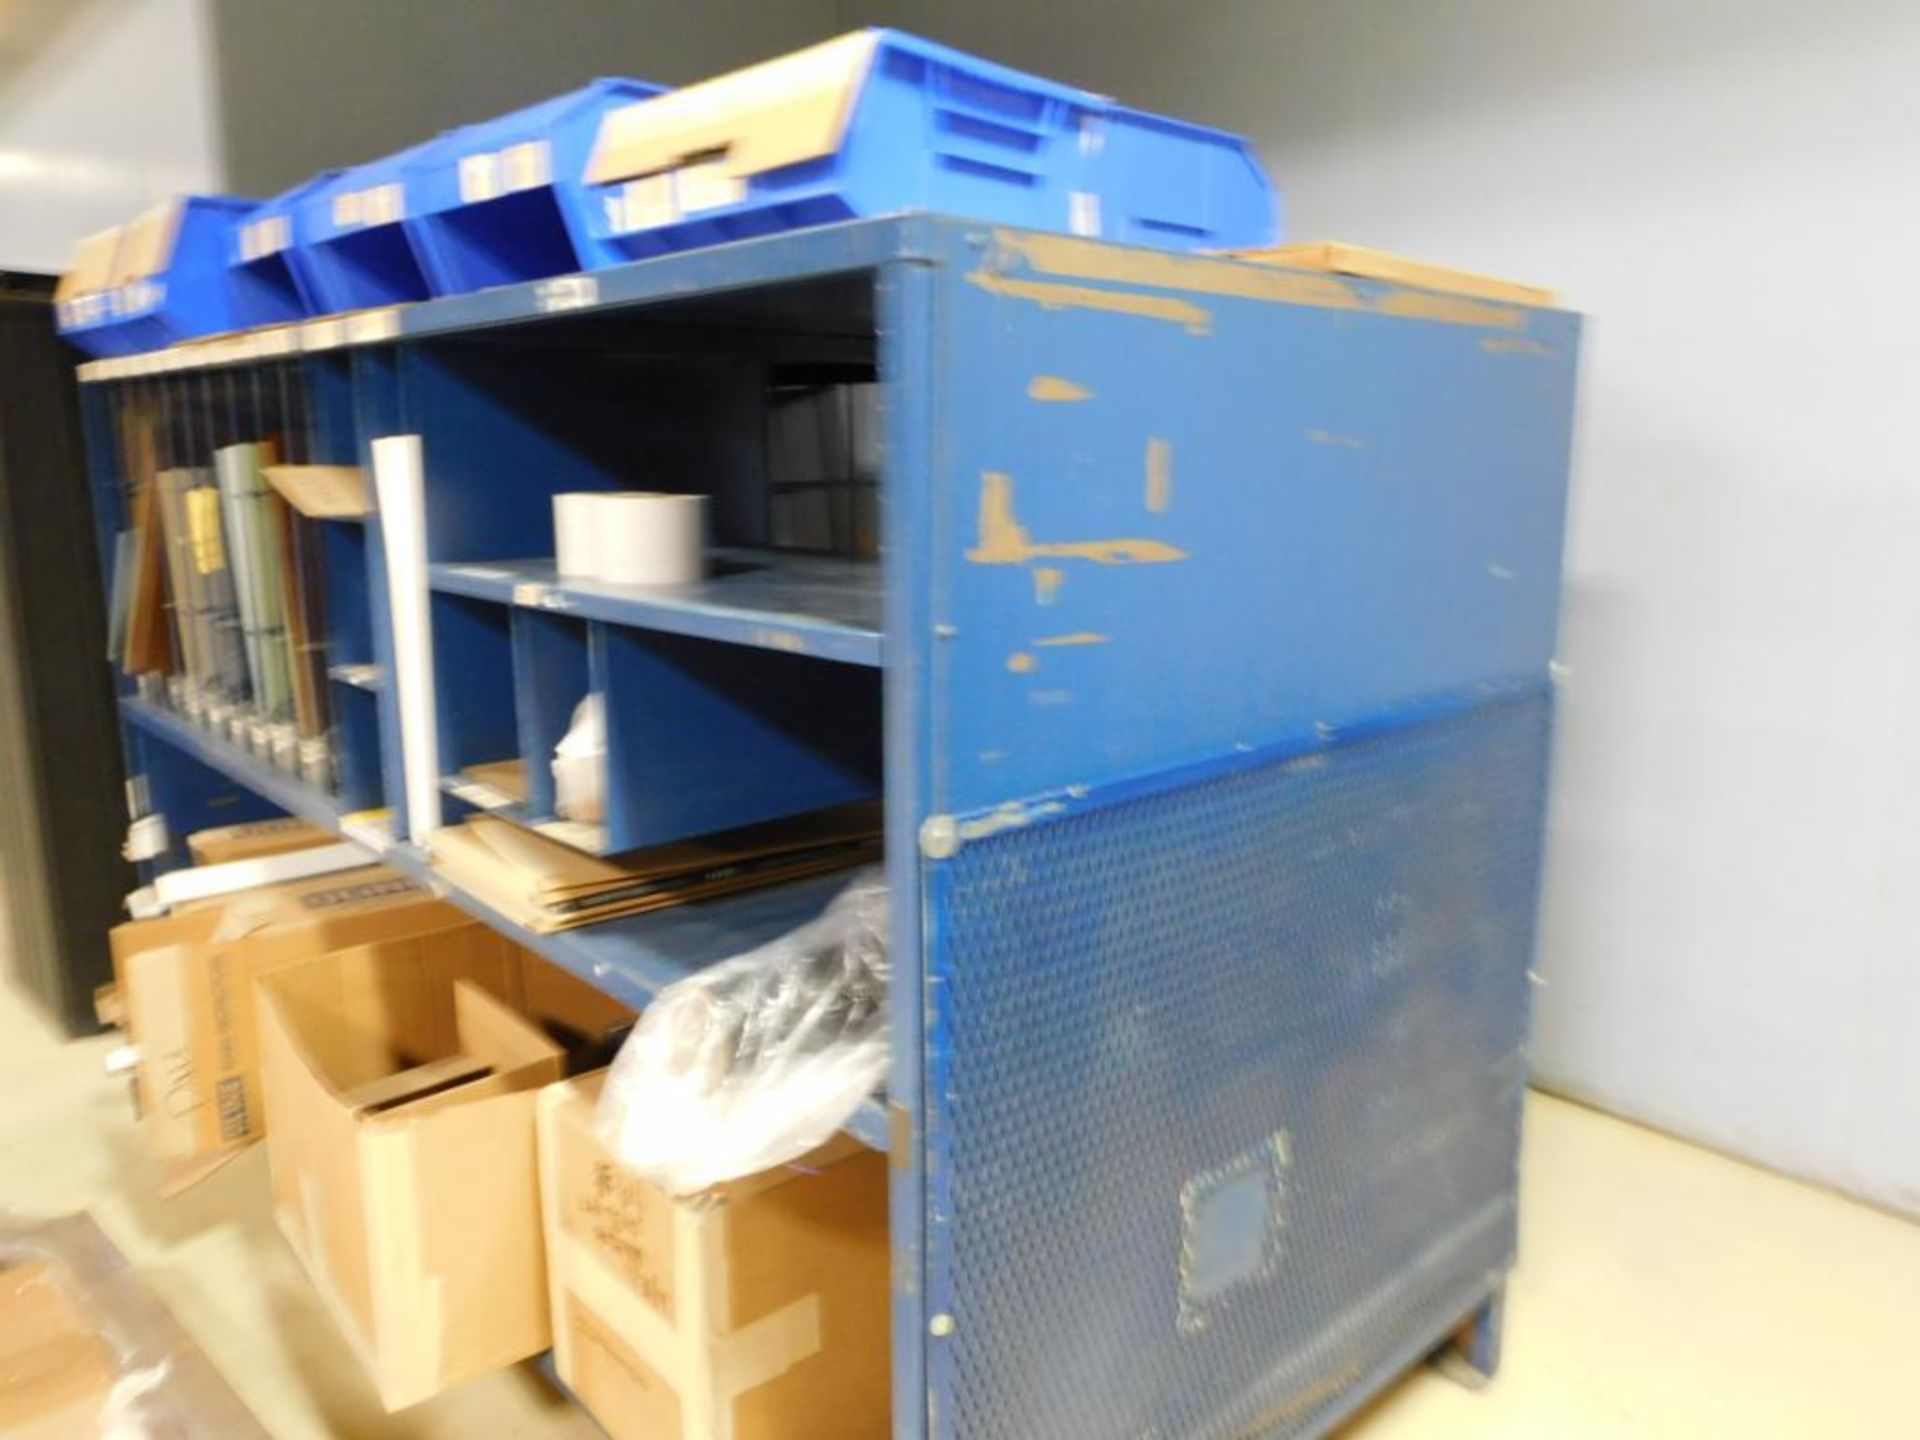 LOT: Shipping Supplies Including (1) 6-Drawer File Cabinet, (1) Storage Cabinet, (1) Metal Storage R - Image 3 of 3